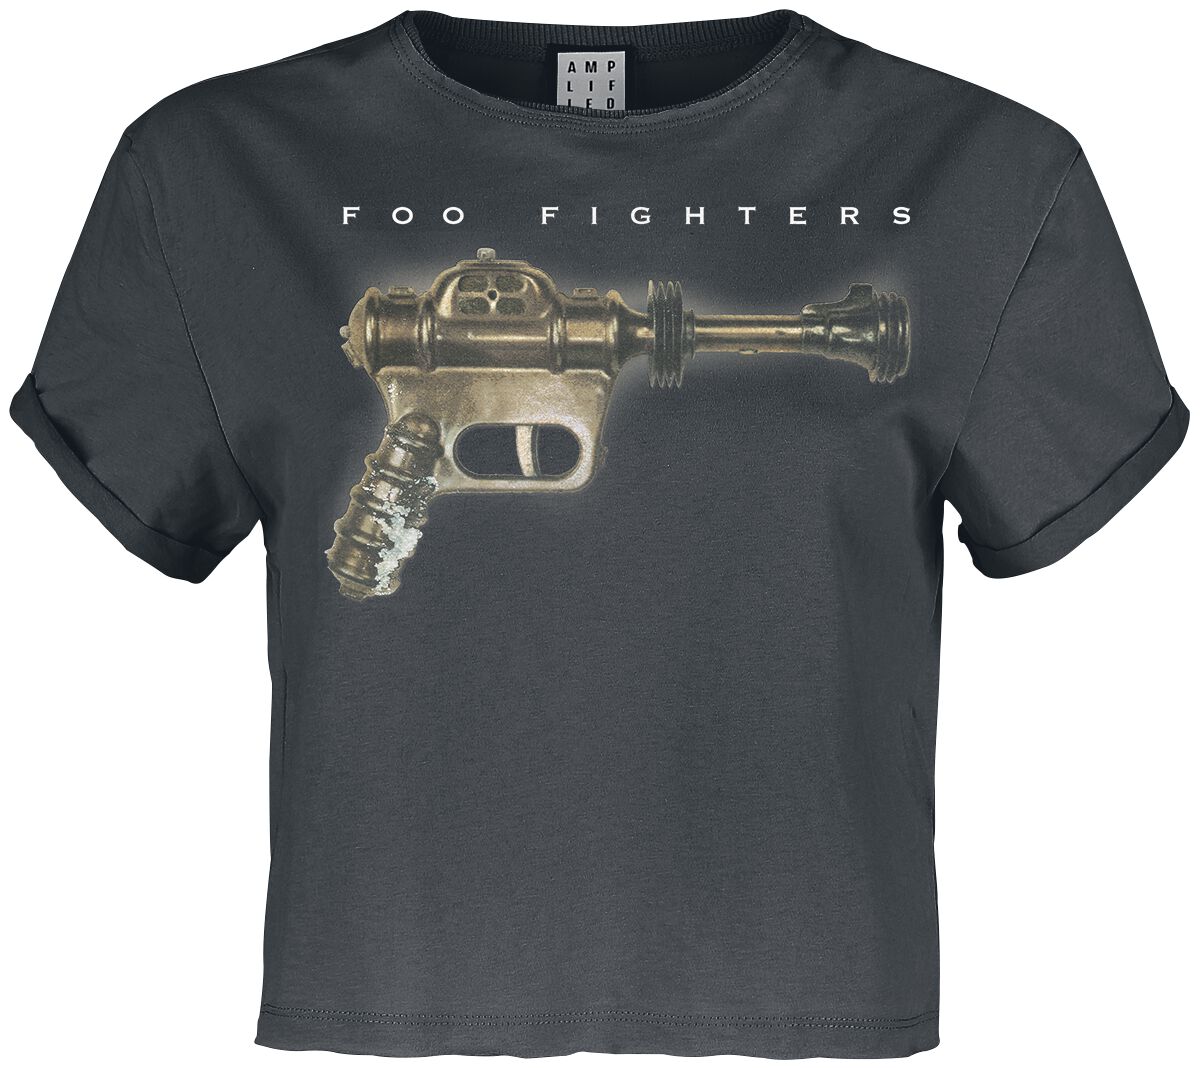 Foo Fighters - Amplified Collection - Ray Gun - T-Shirt - charcoal